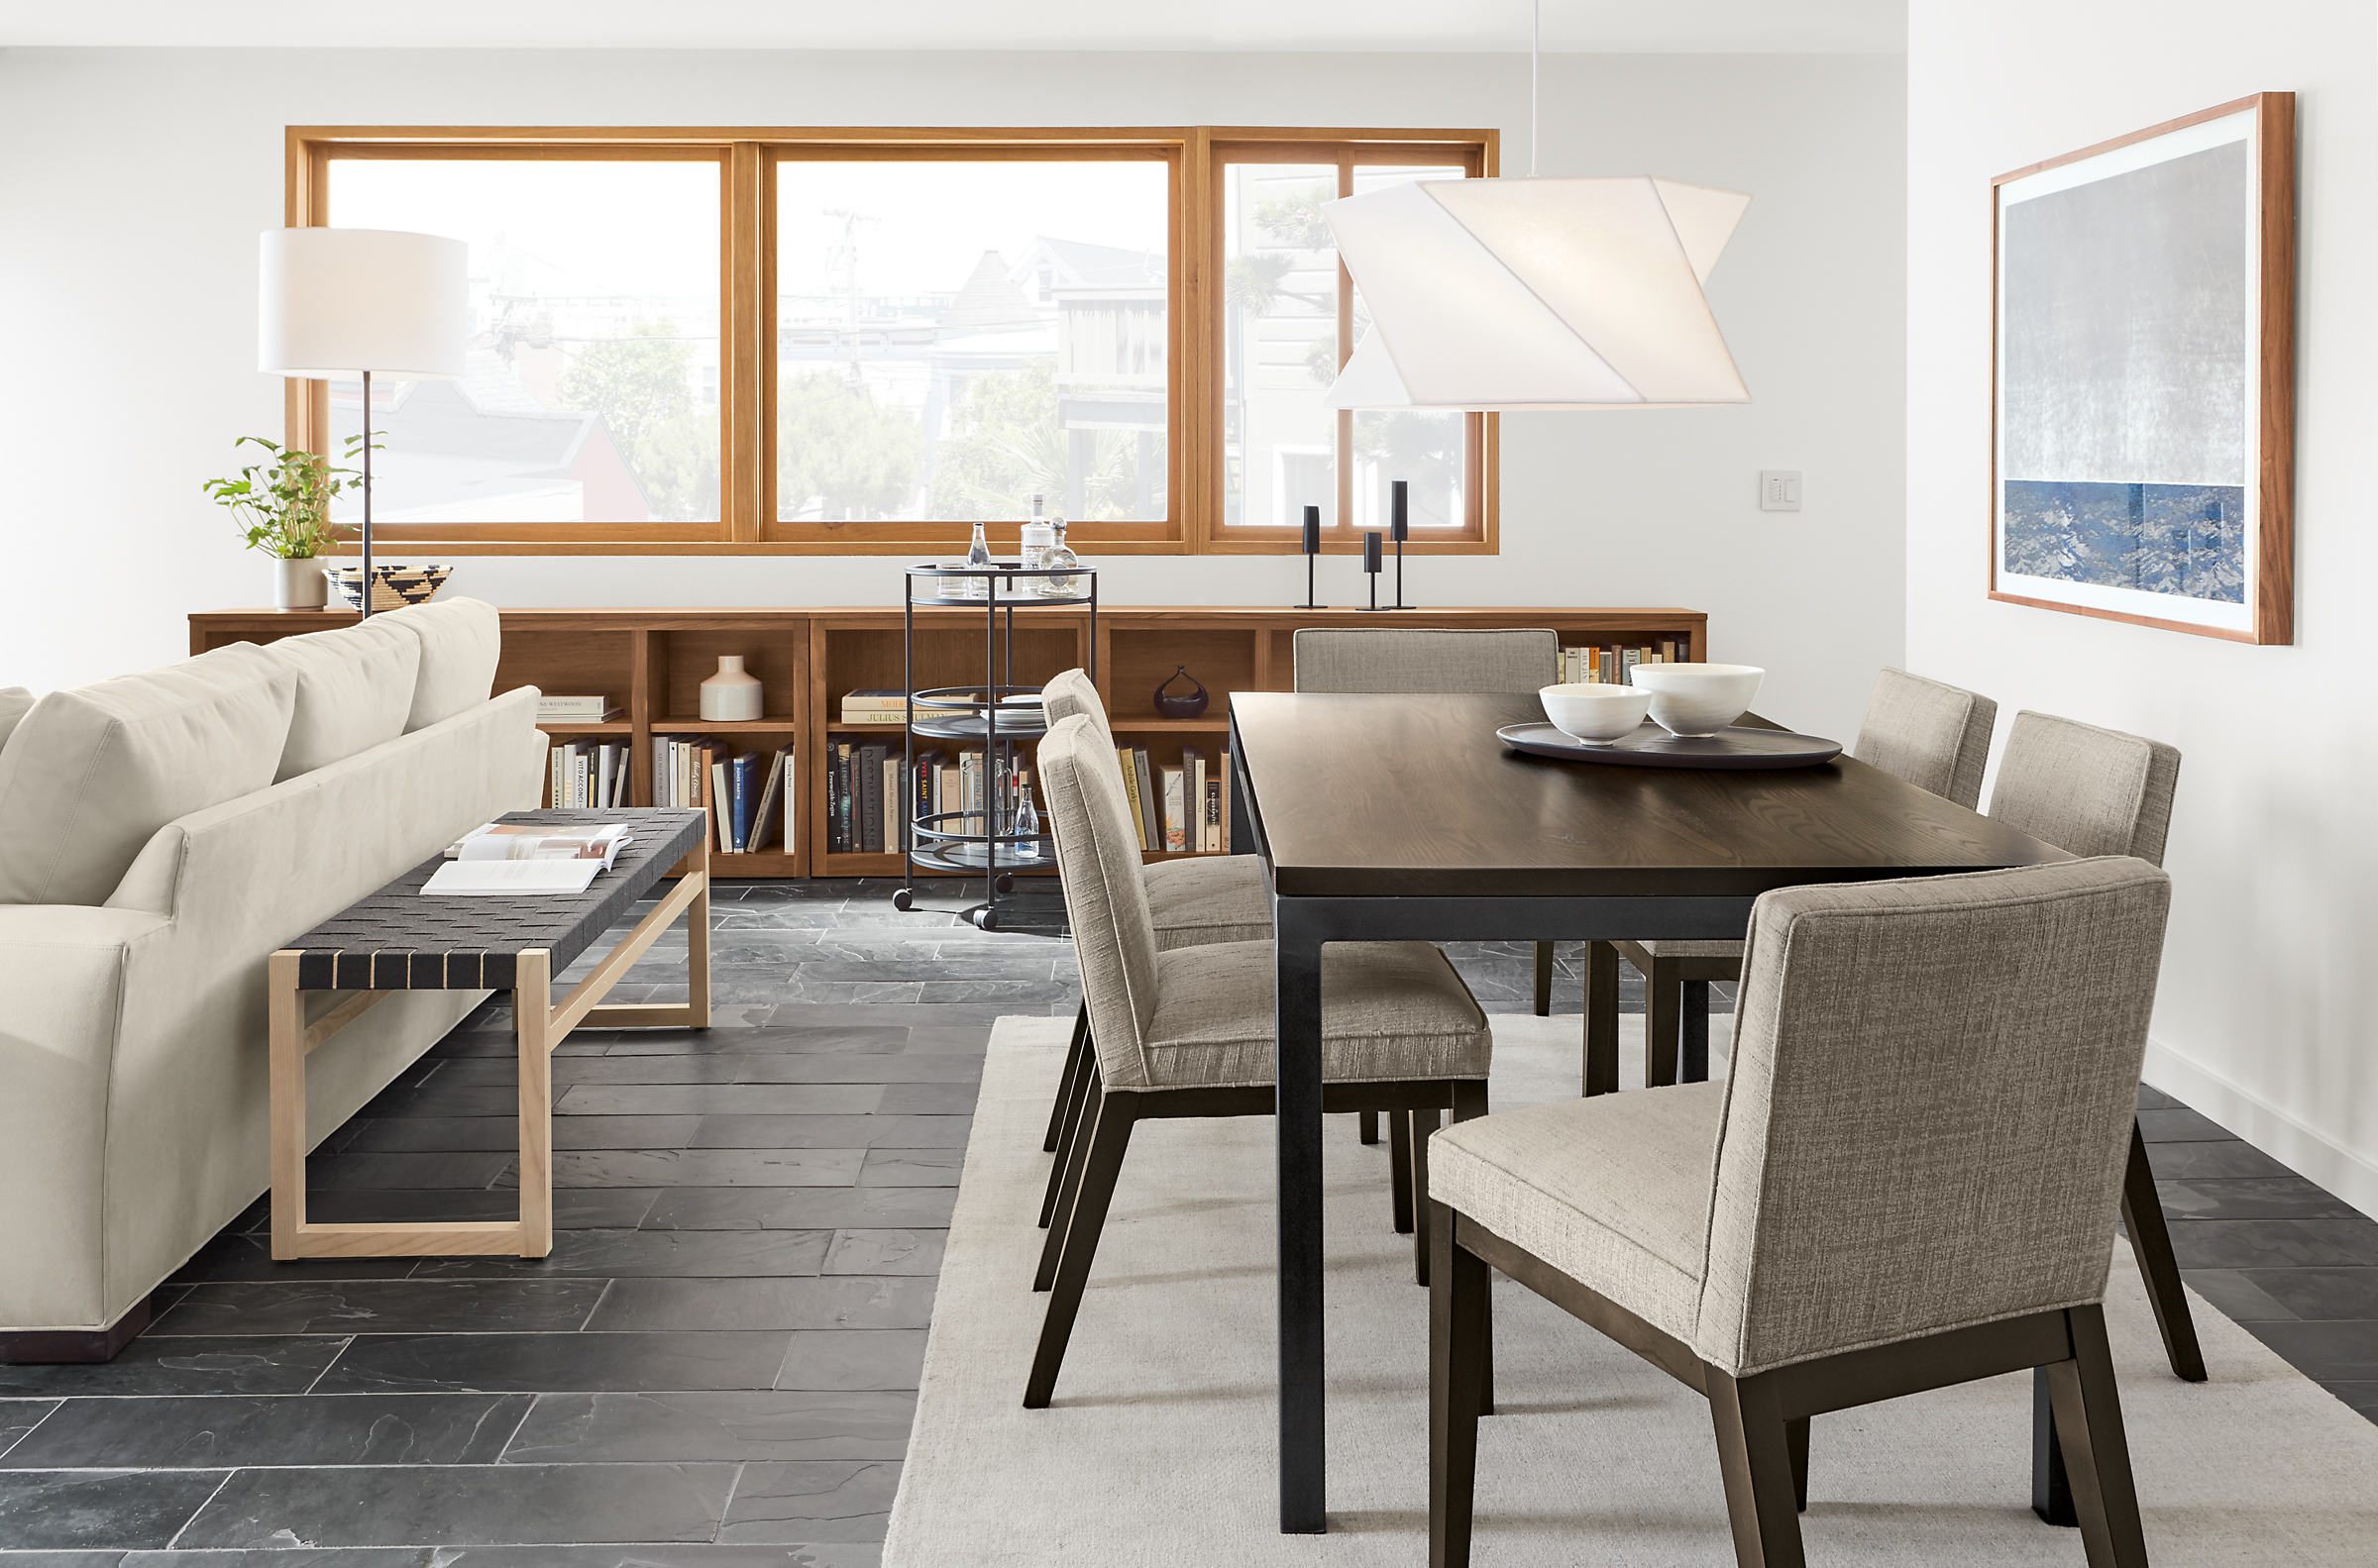 Parsons dining table in open concept room.